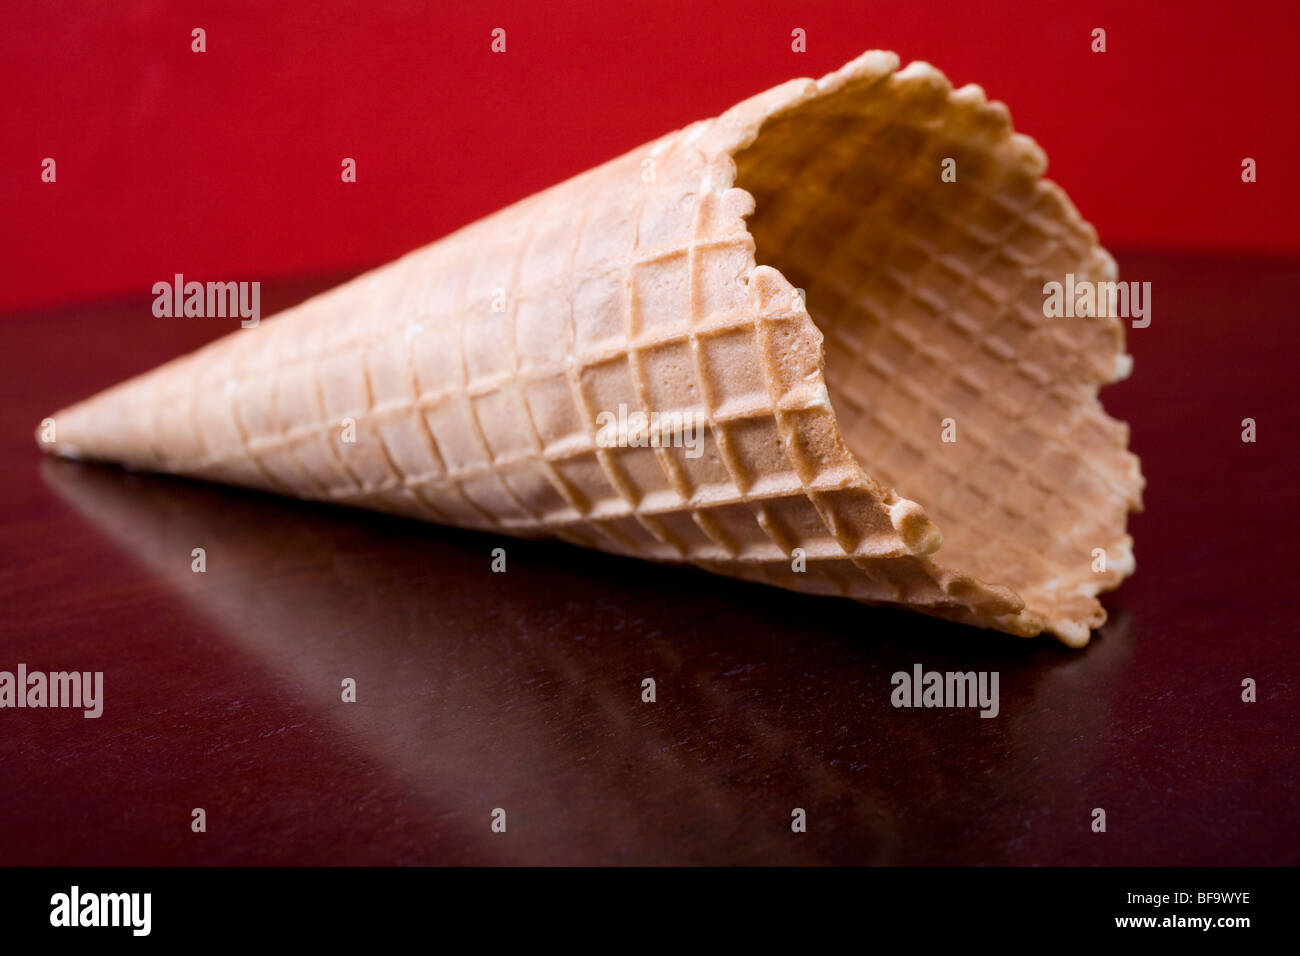 Quality ice cream cone on a brown table against a red wall. Stock Photo